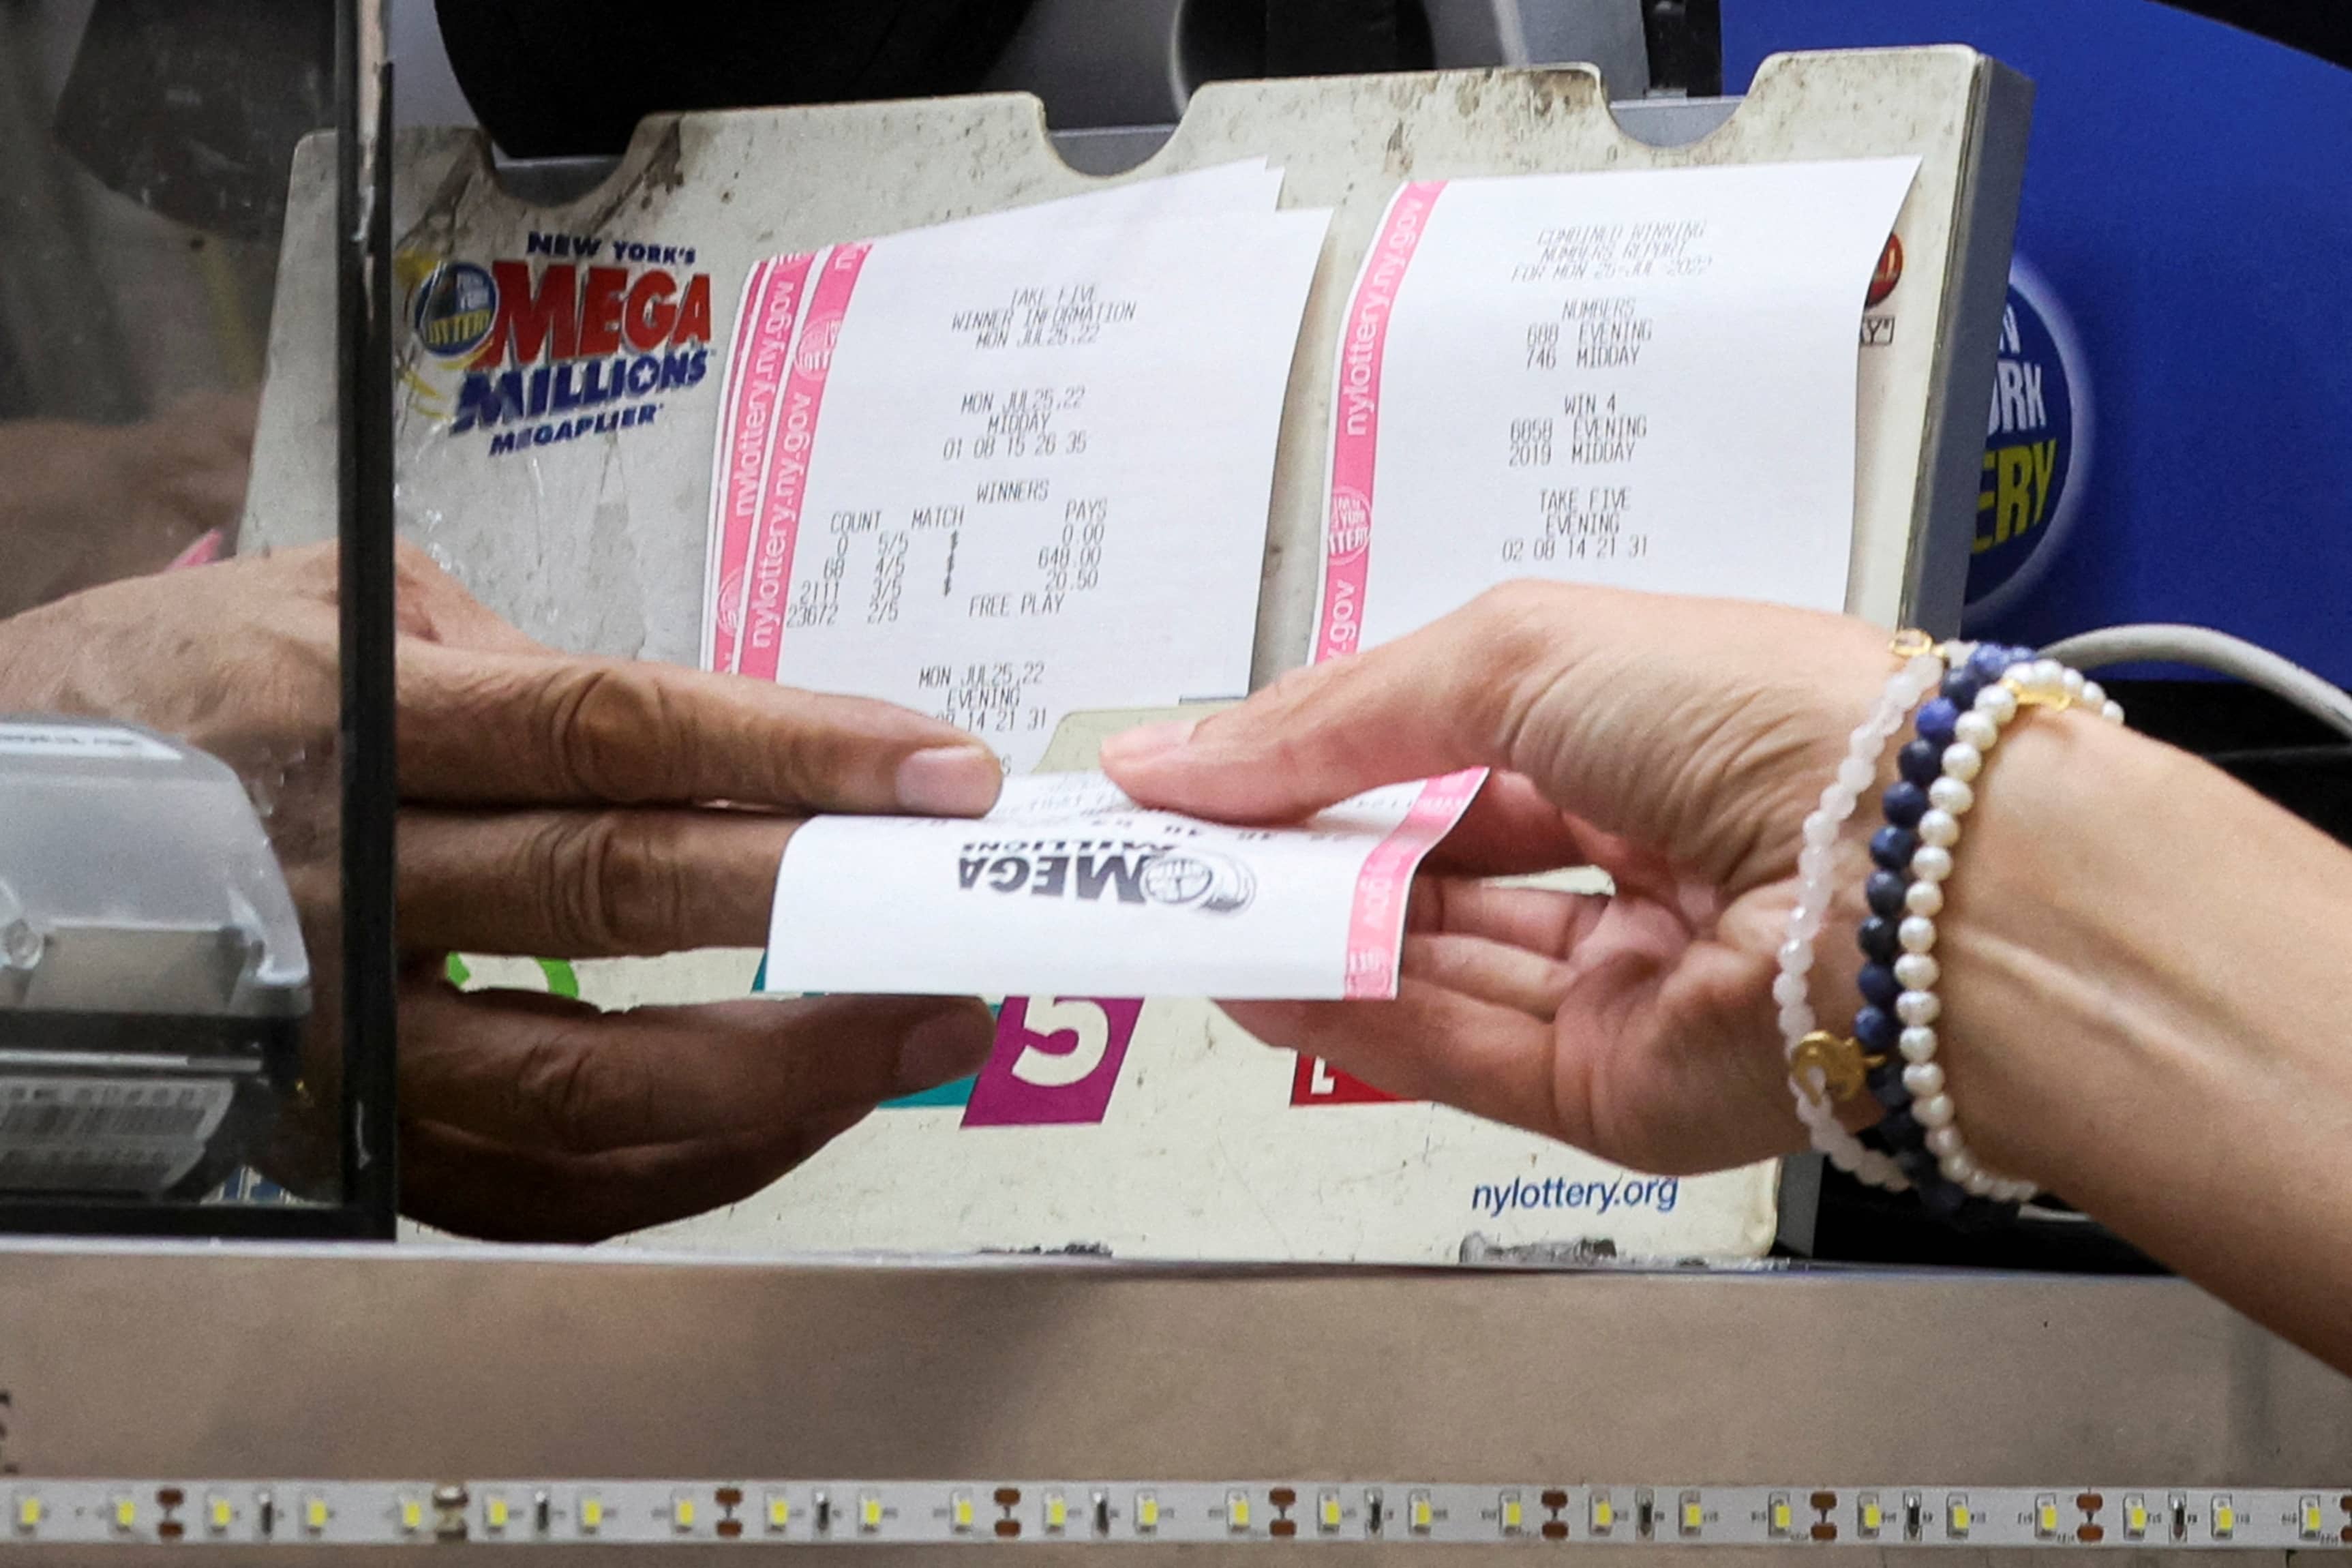 file-photo-a-woman-buys-a-ticket-for-the-mega-millions-lottery-drawing-at-a-news-stand-in-new-york